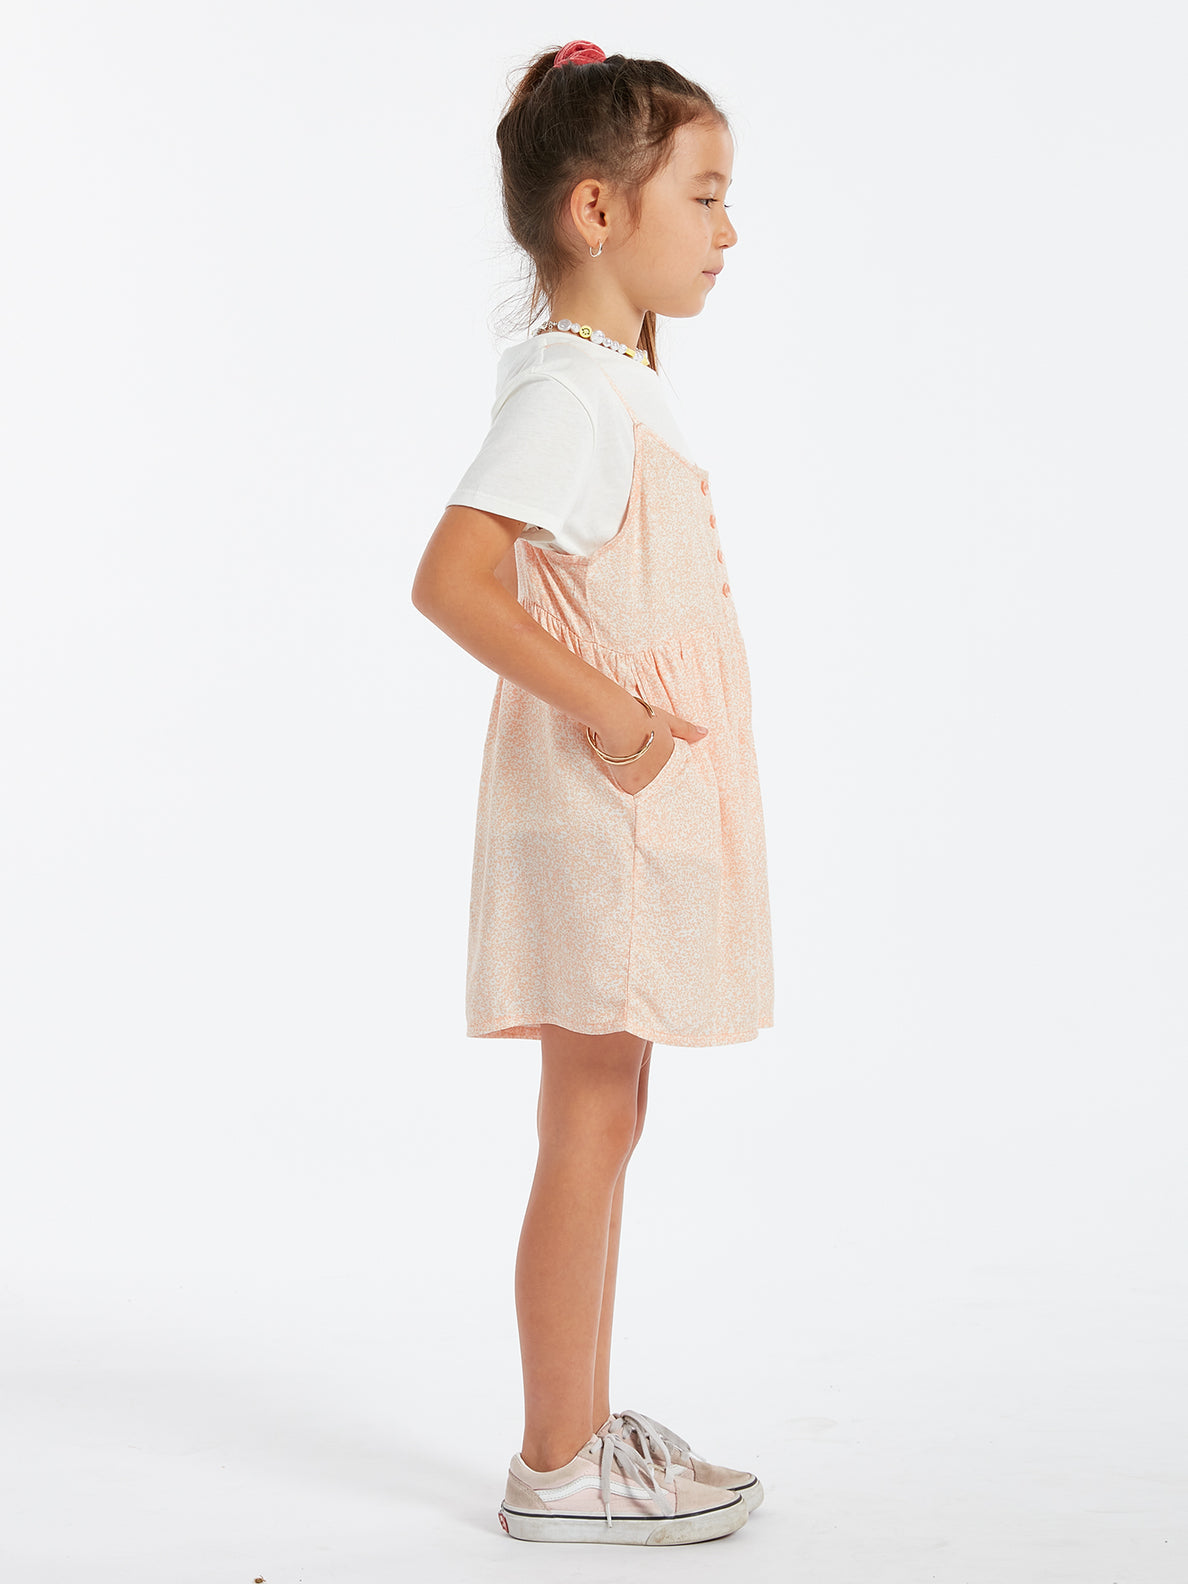 STATIC BLOOM GIRL'S ROMPER / 4 TO 10 YEARS